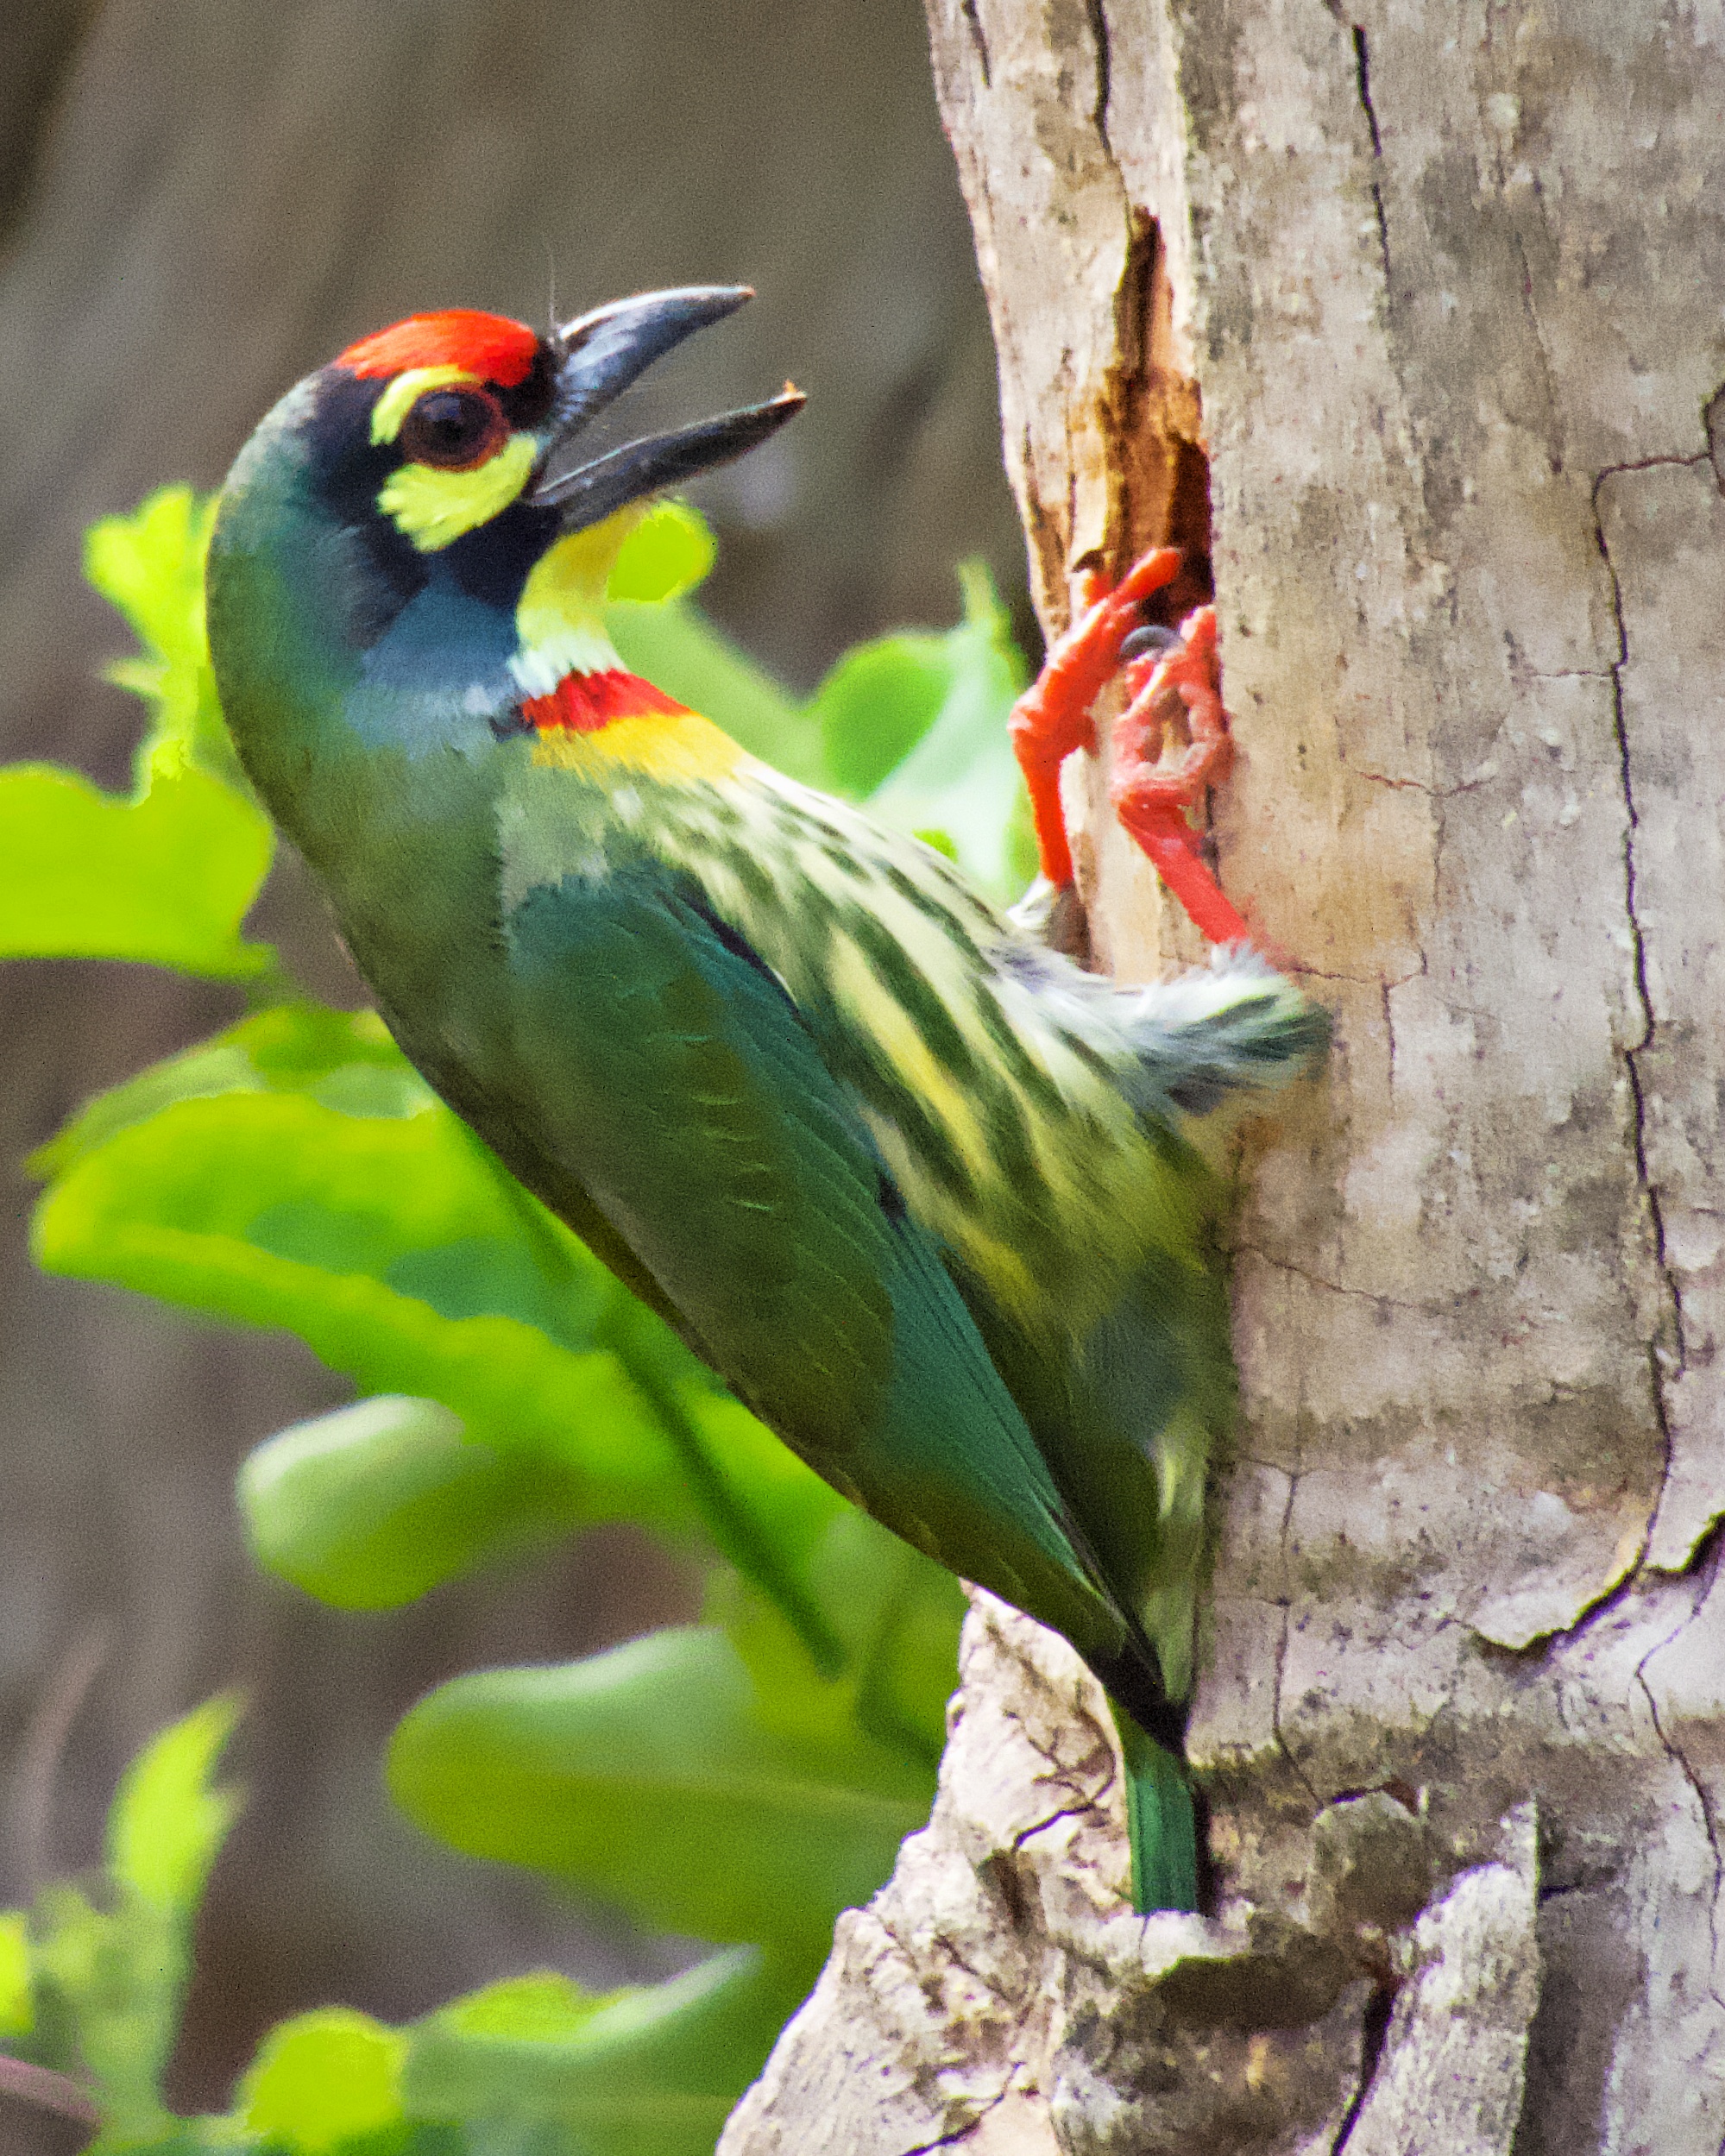 Coppersmith barbet - a green and yellow bird with a bright red head.